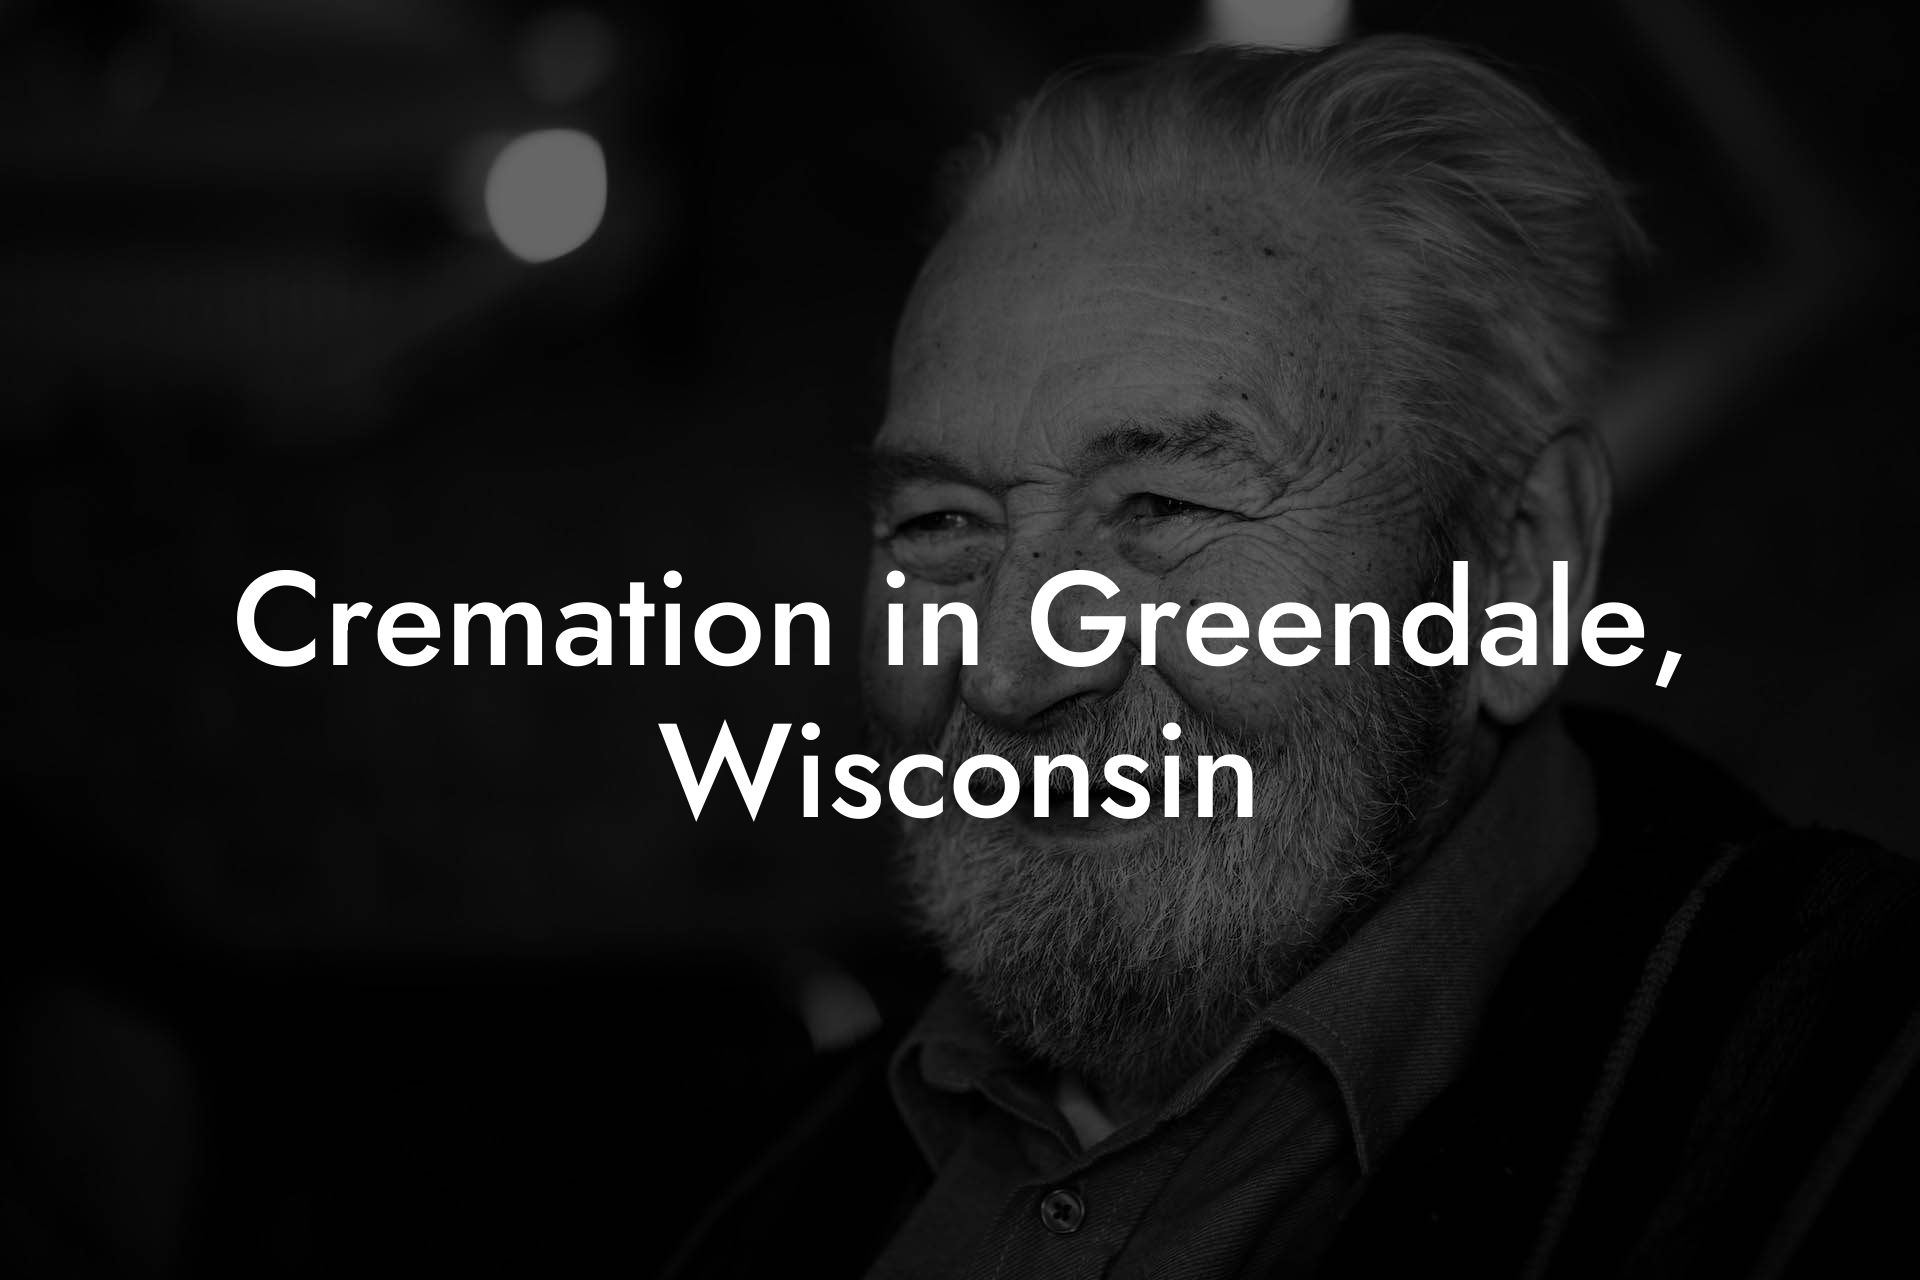 Cremation in Greendale, Wisconsin